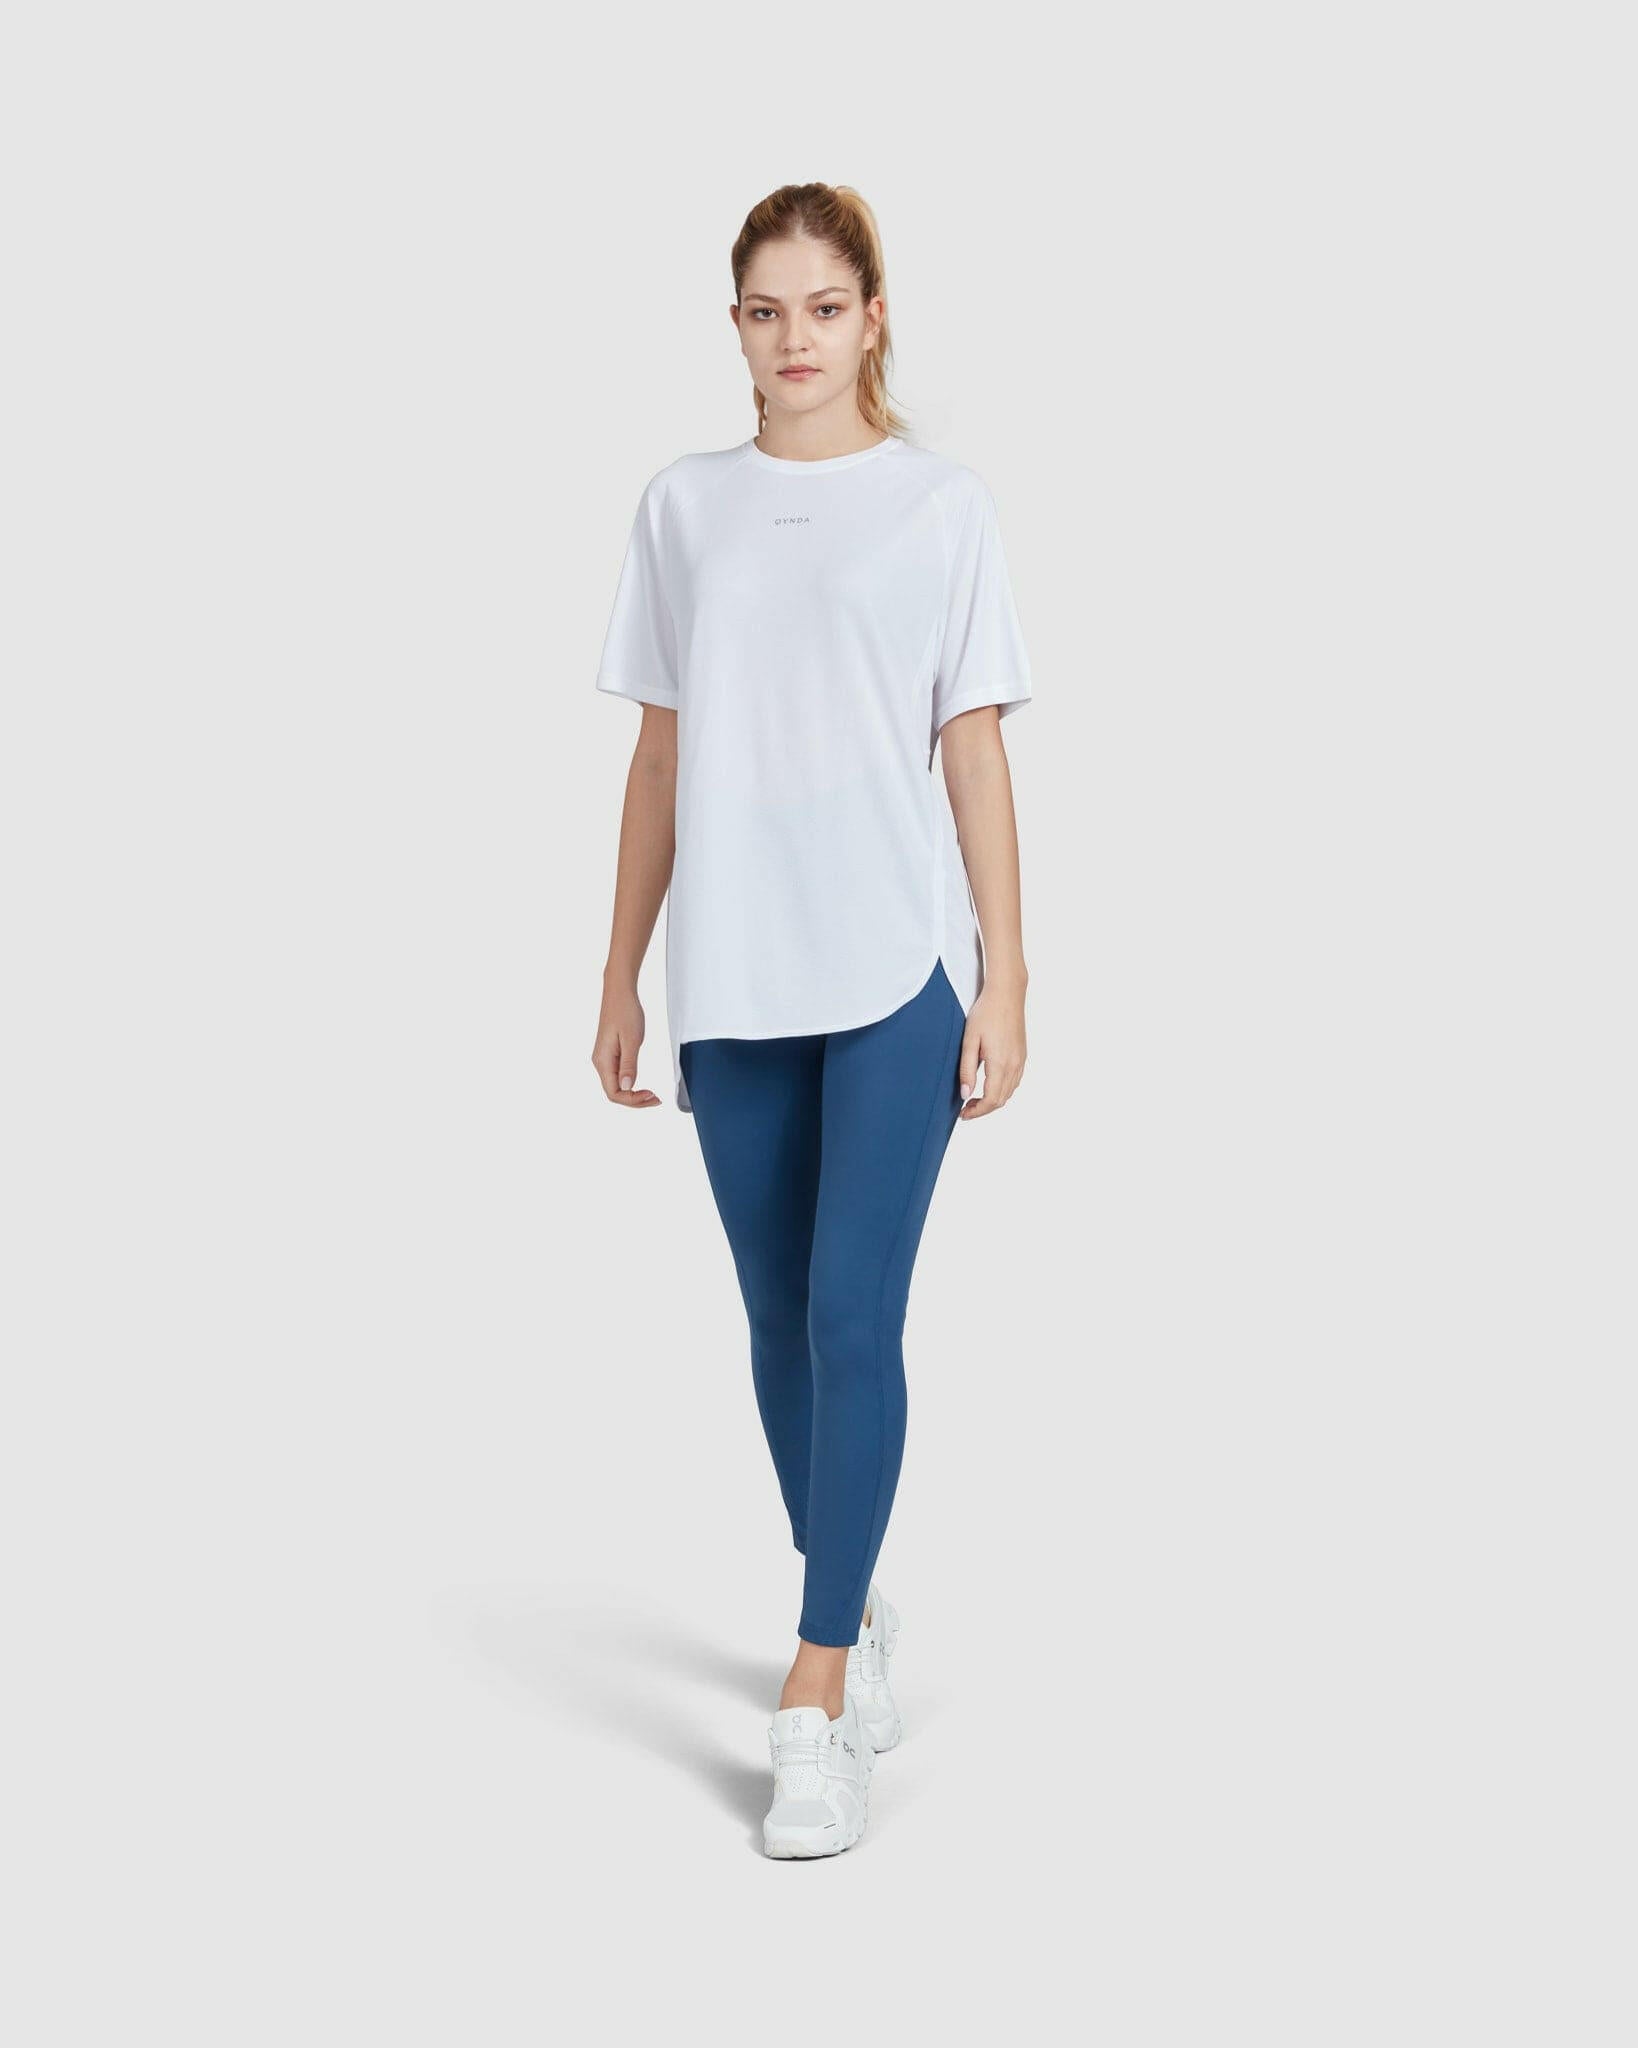 A young woman in a casual short sleeve white BREATHE T-SHIRT by qynda and blue leggings standing against a white background, wearing white sneakers, embodying a simple, sporty, and comfortable style.